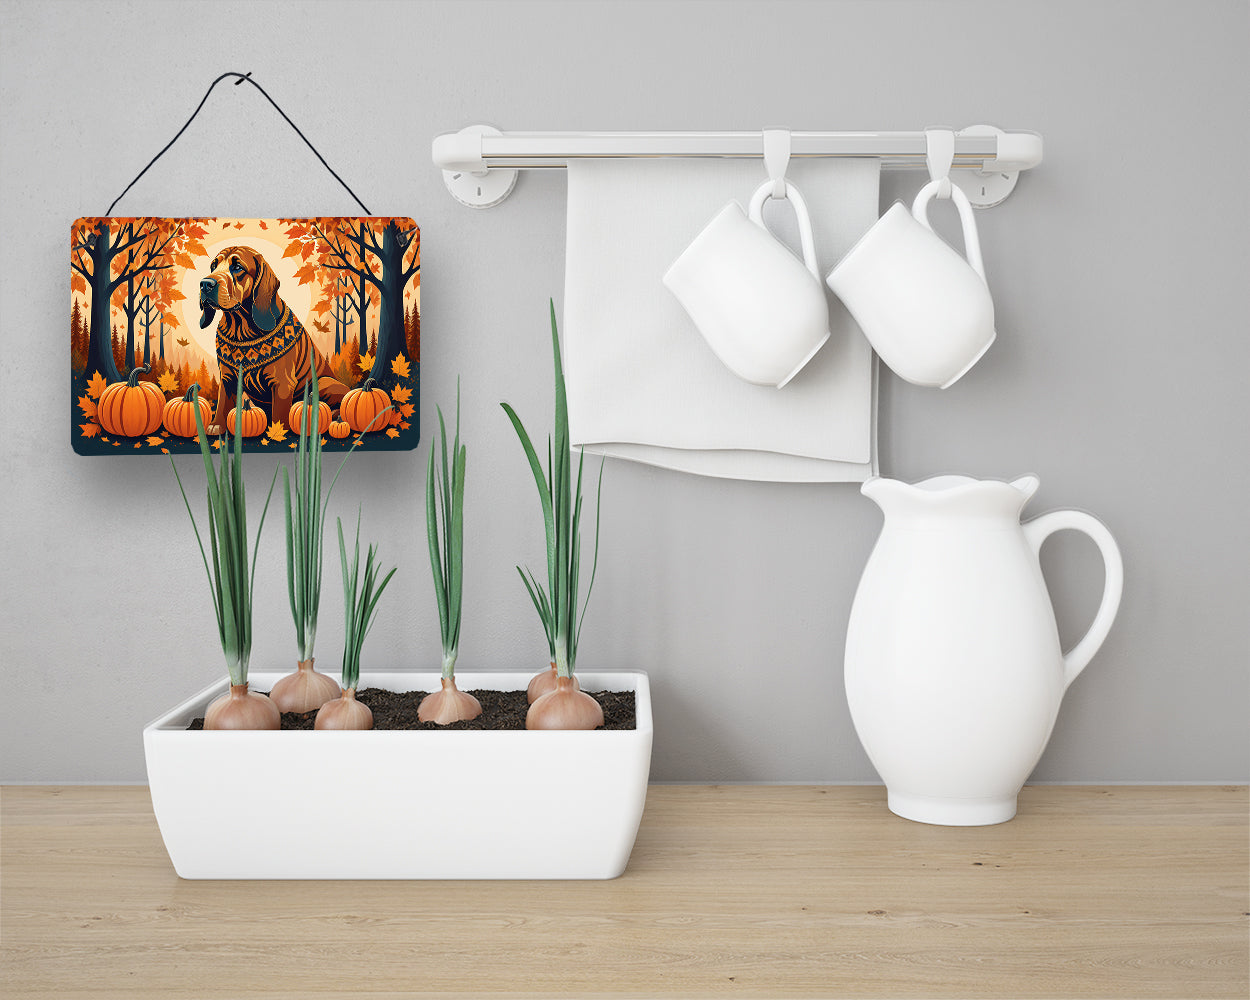 Bloodhound Fall Wall or Door Hanging Prints